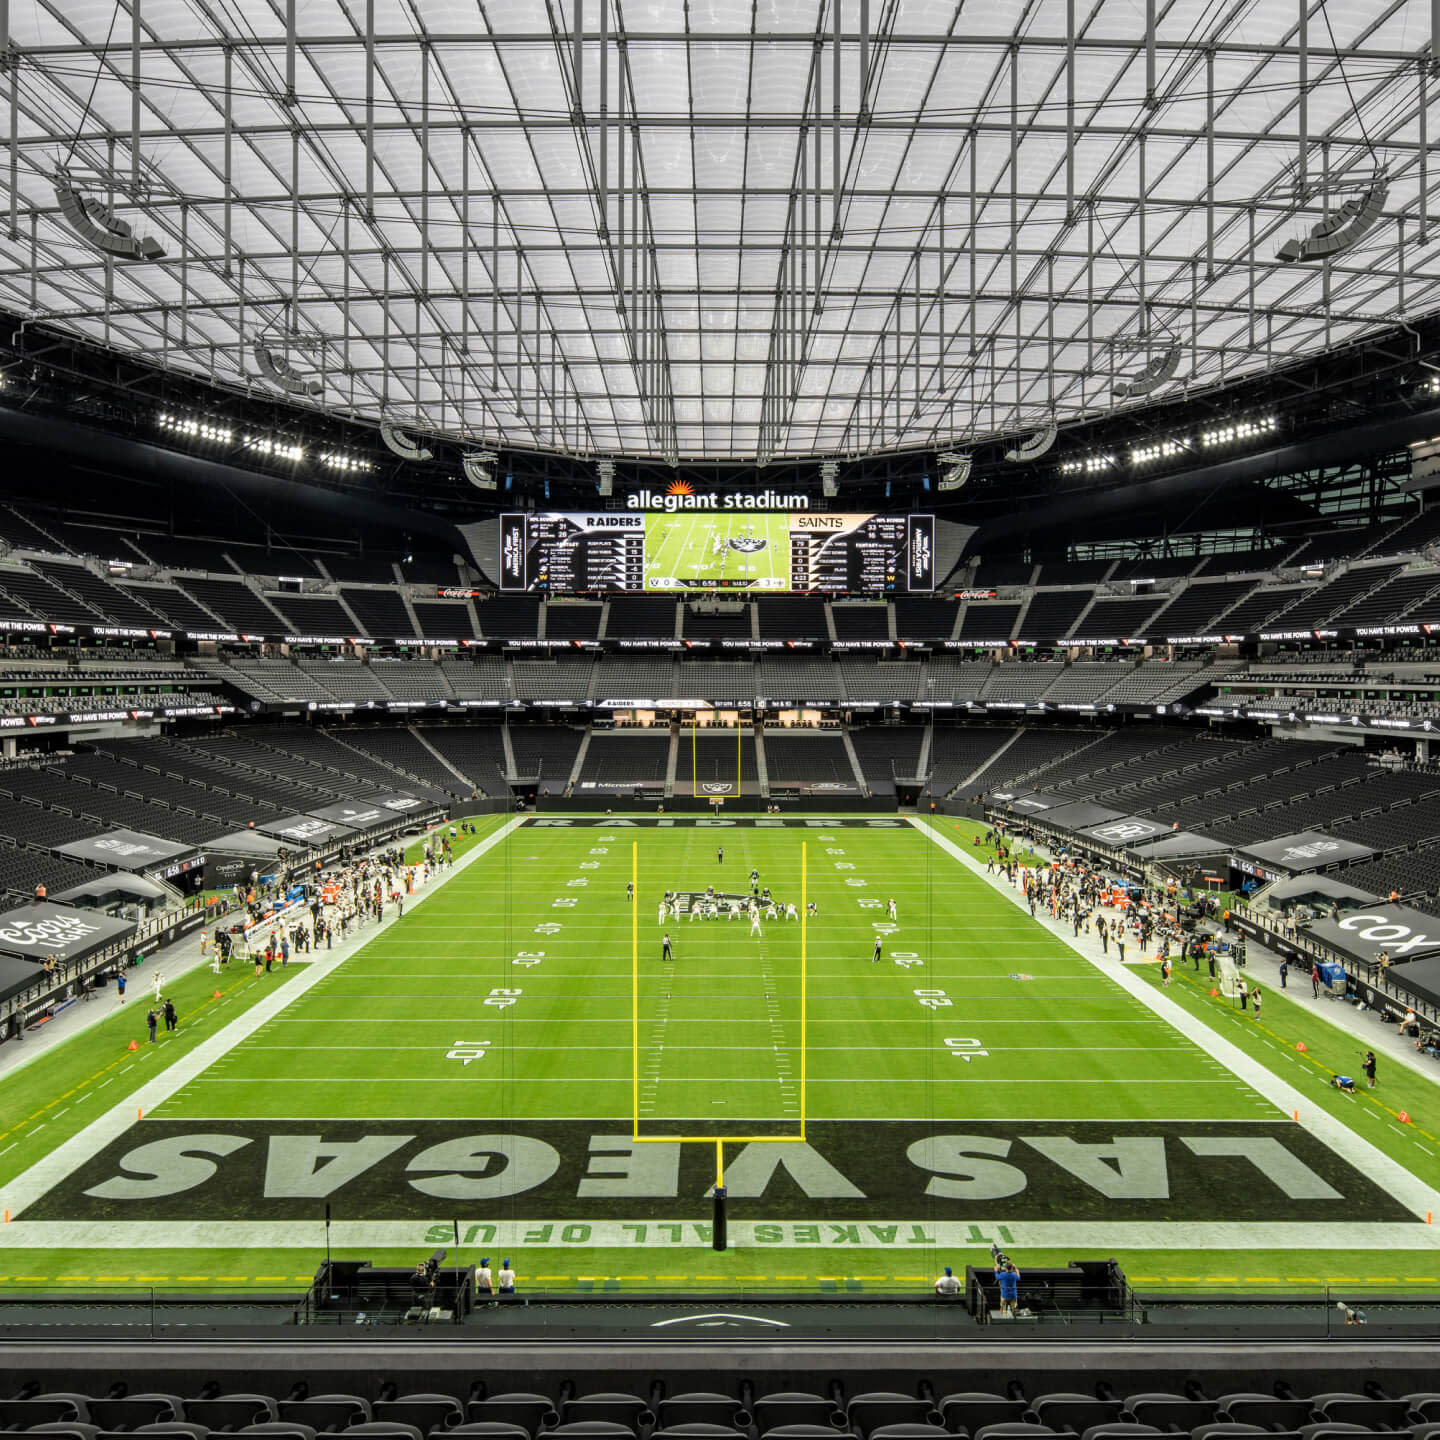 Indoor Football Practice Facility For Las Vegas Raiders—Largest in US